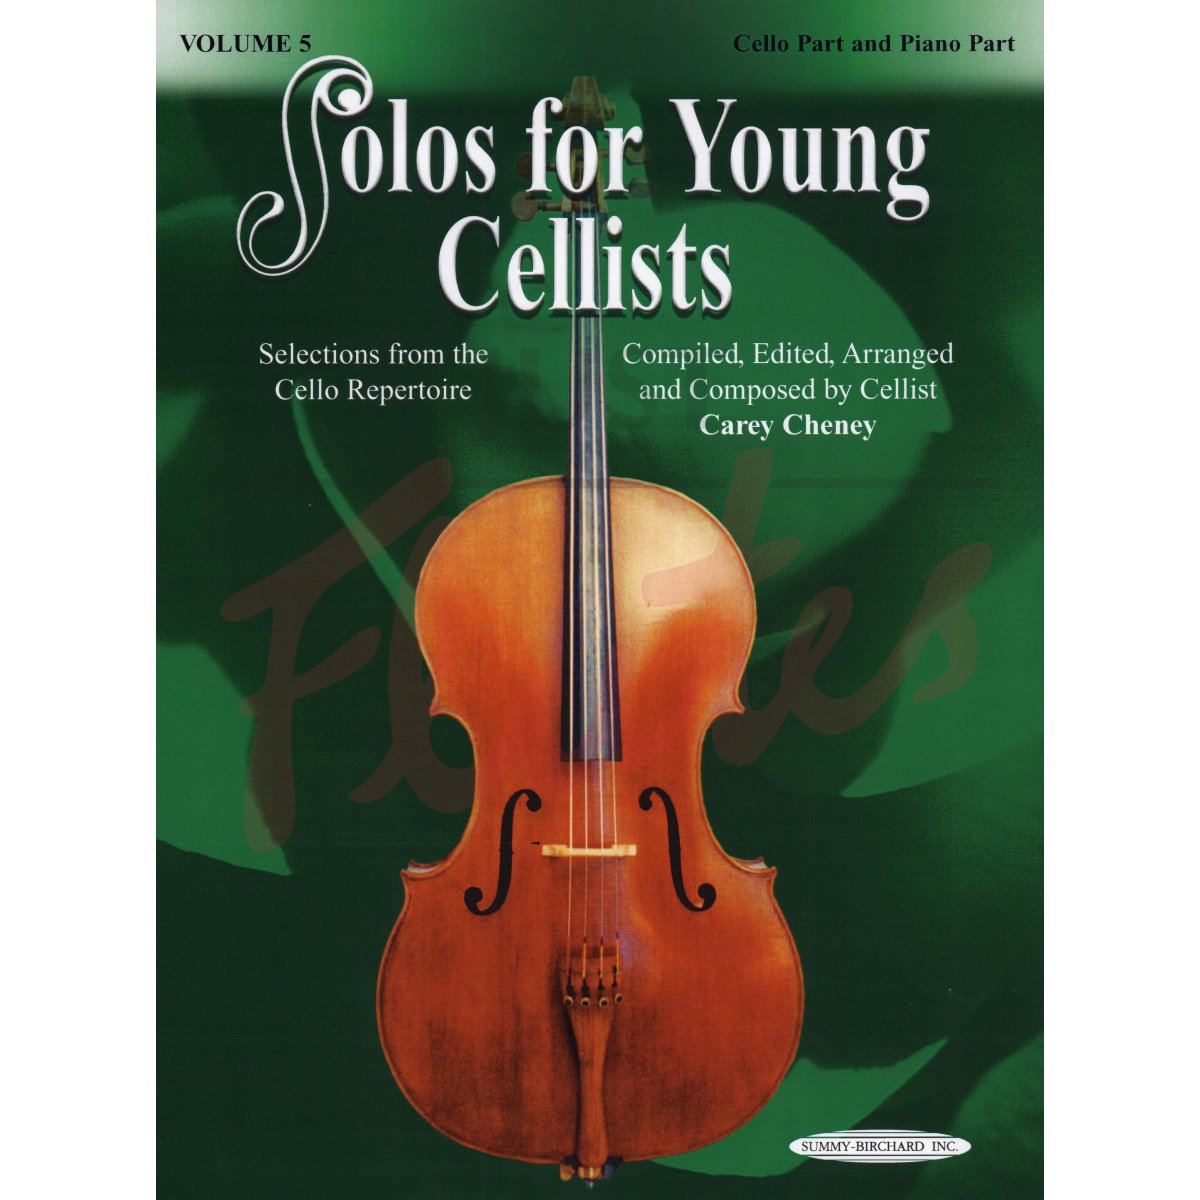 Solos for Young Cellists Vol 5